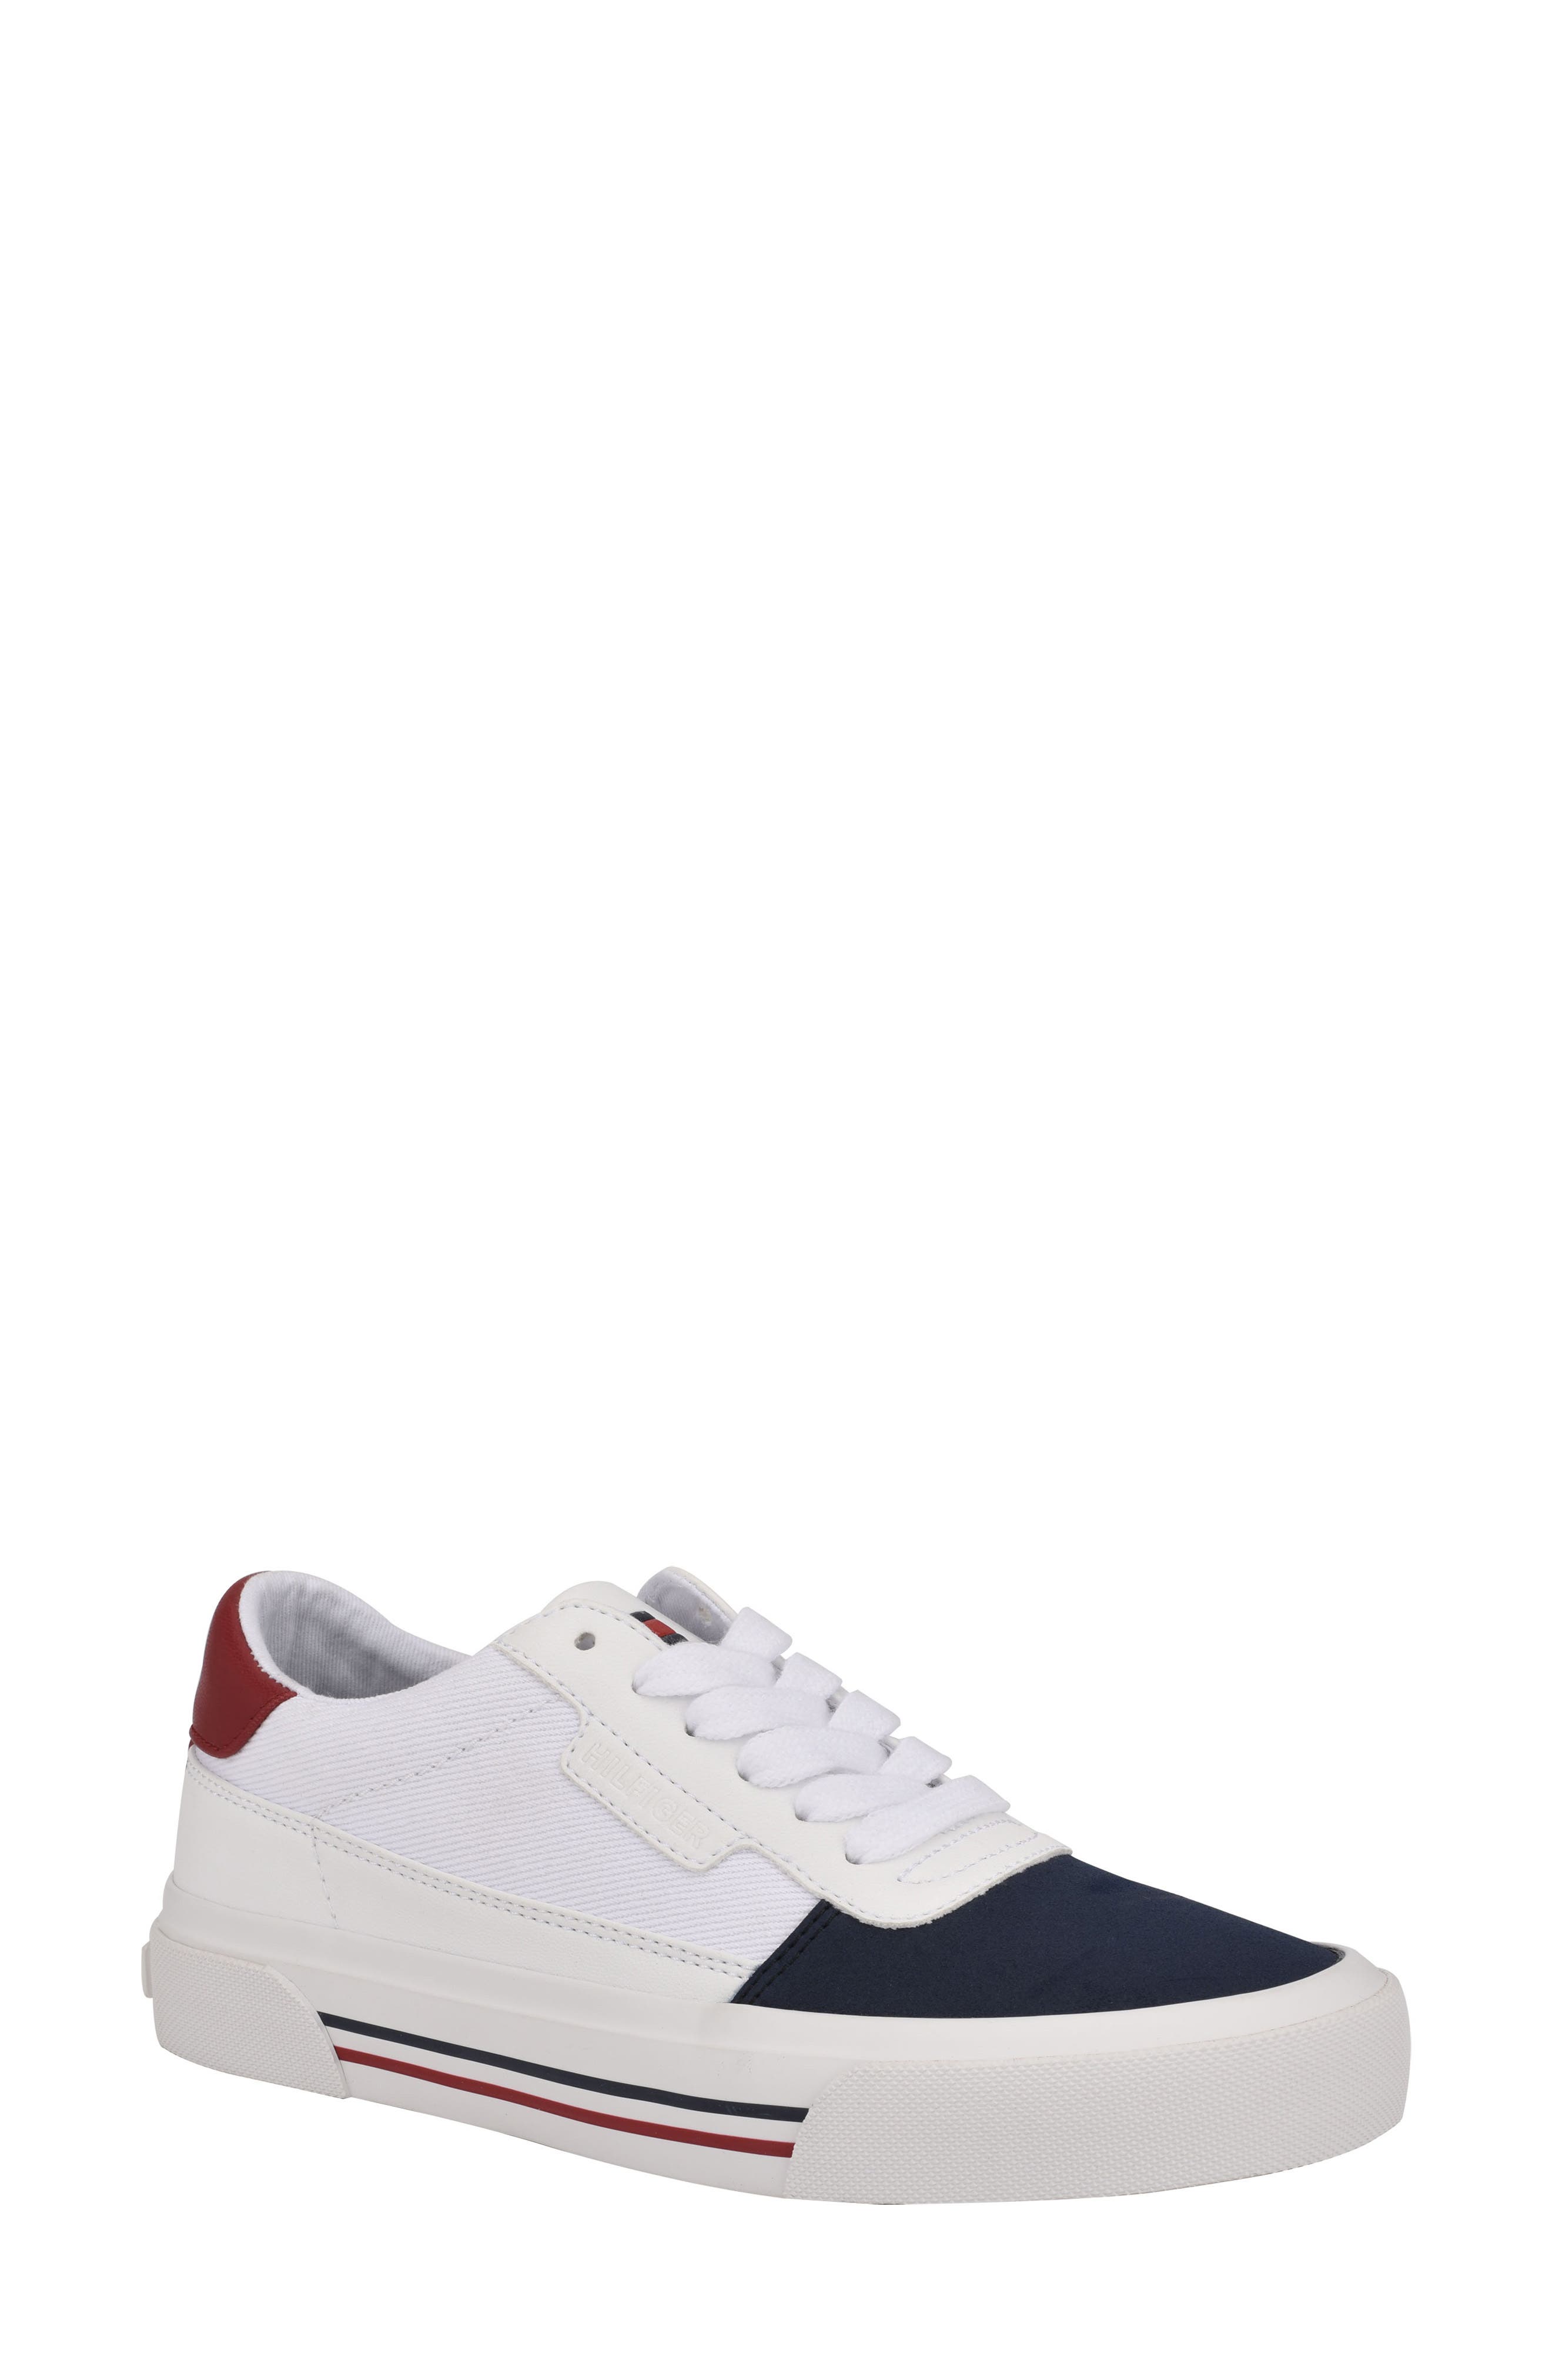 tommy hilfiger shoes ross